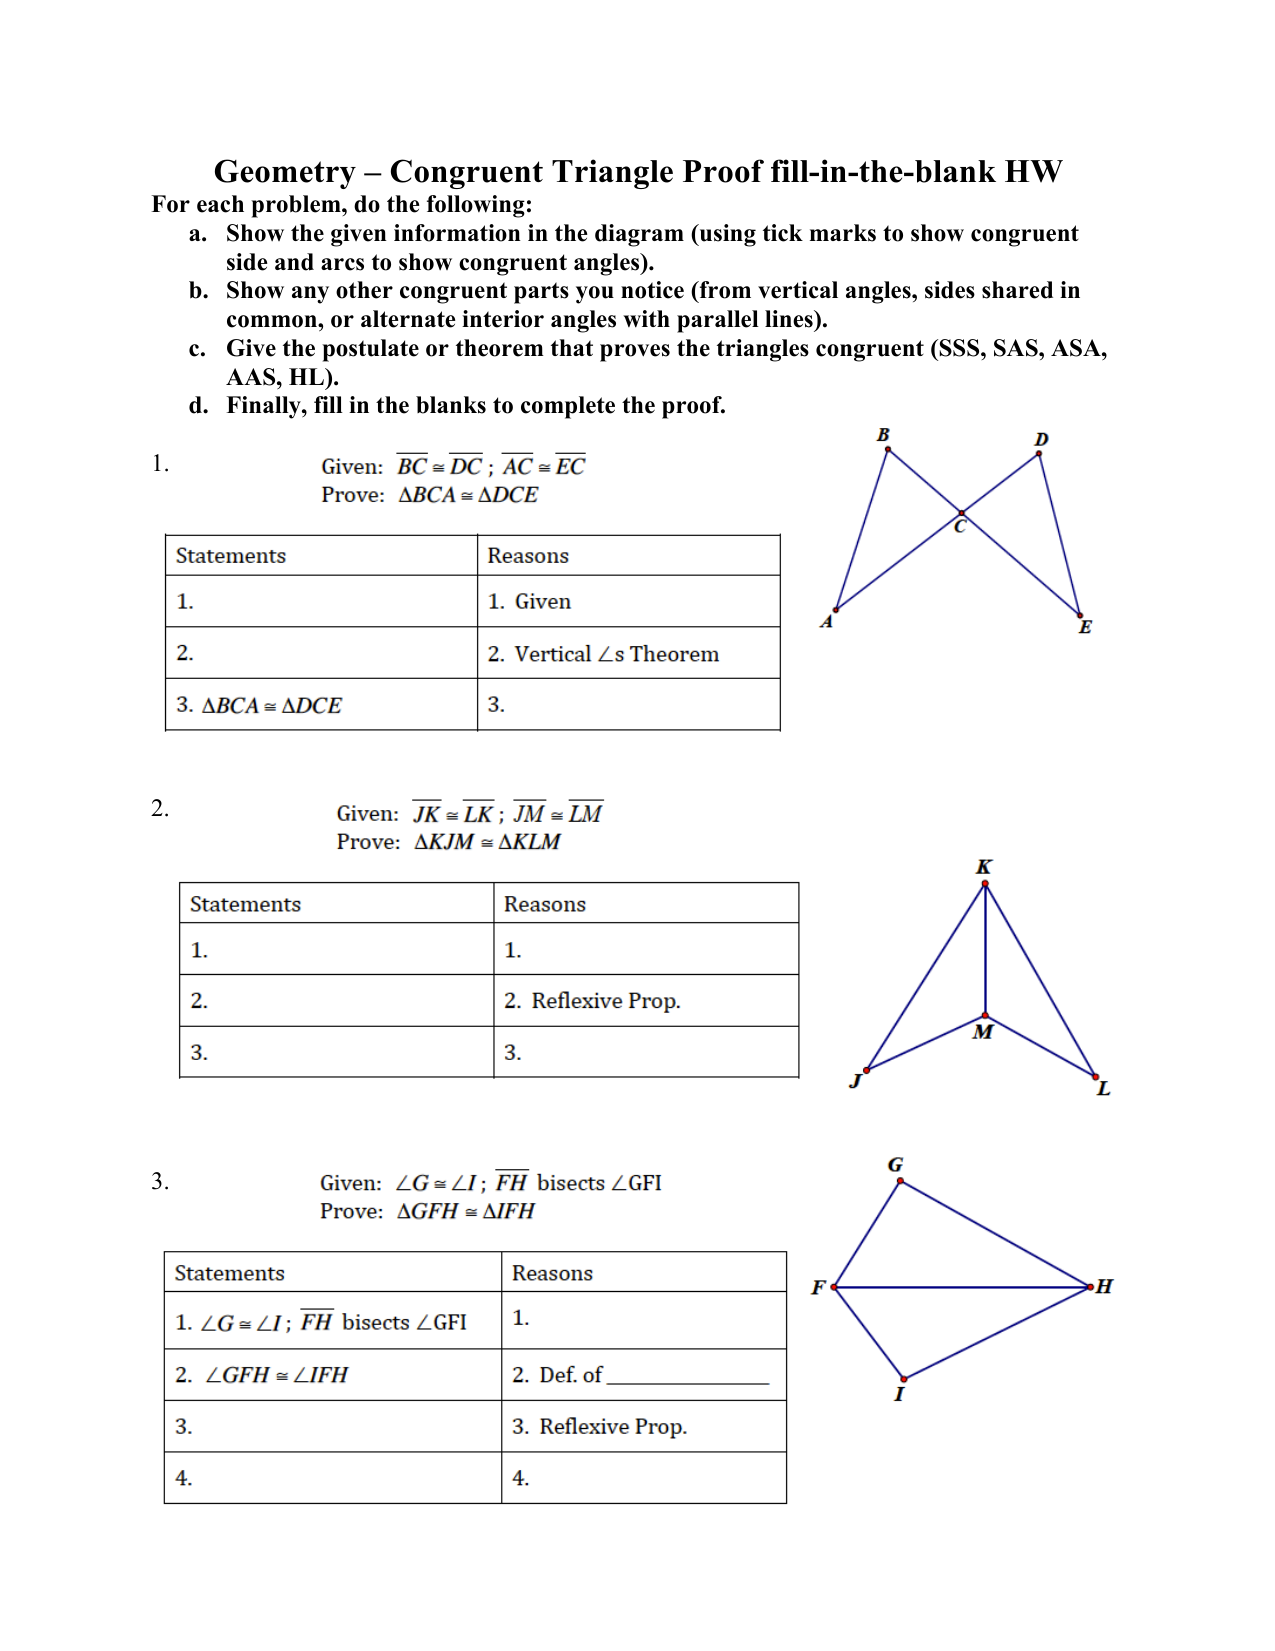 Geometry – Congruent Triangle Proof fill-in-the-blank With Geometric Proofs Worksheet With Answers